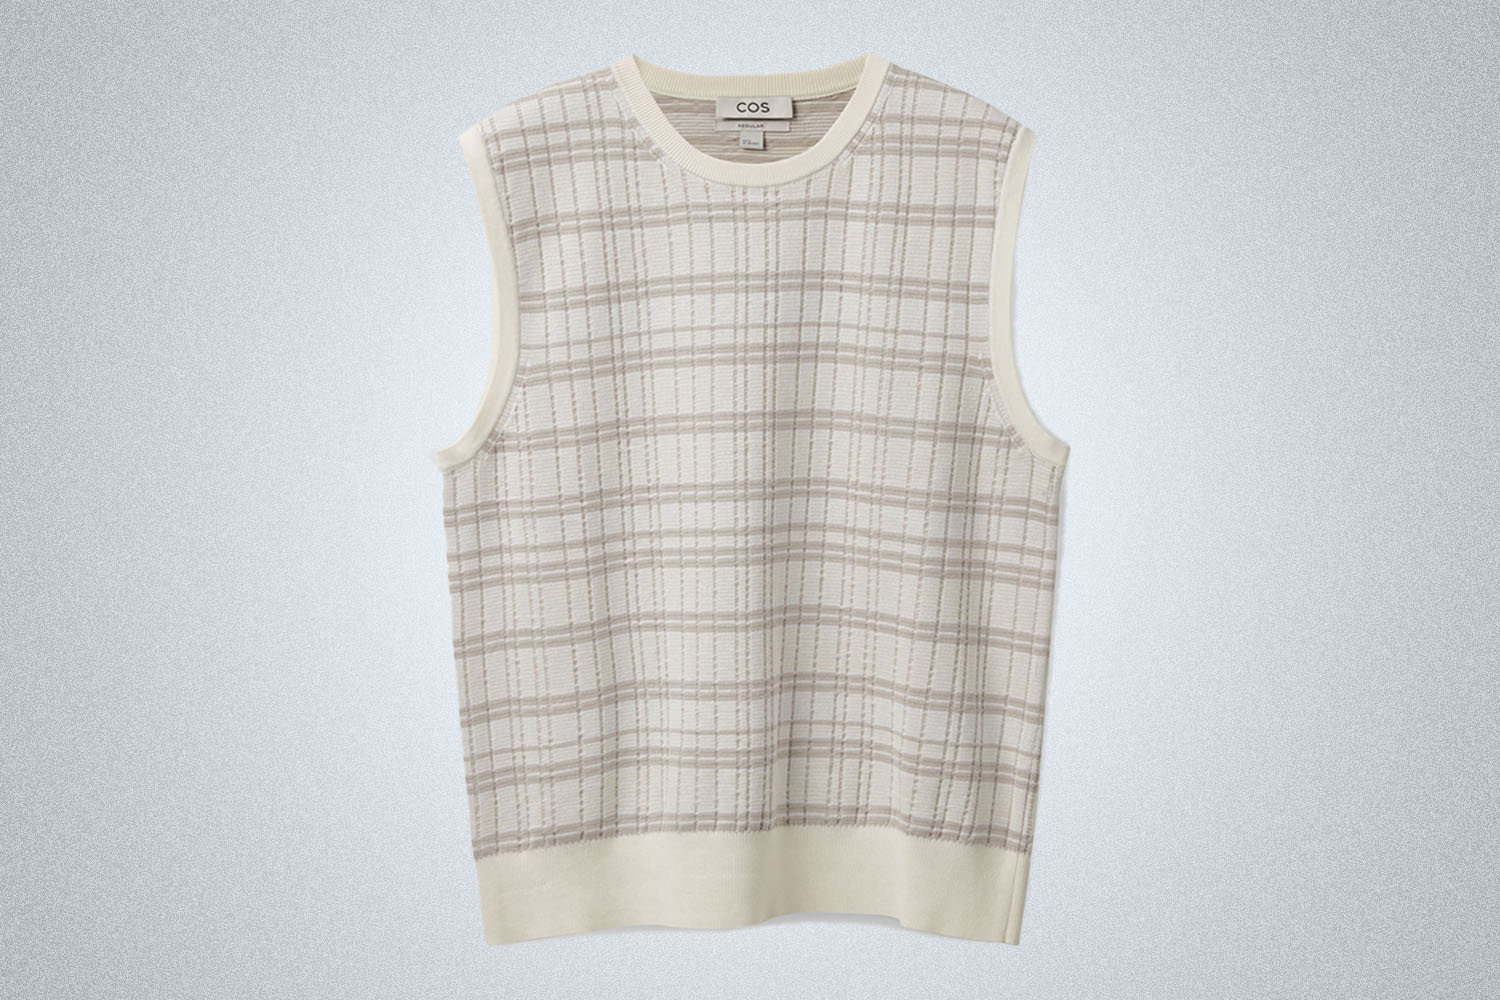 a beige sweater vest from COS on a grey background